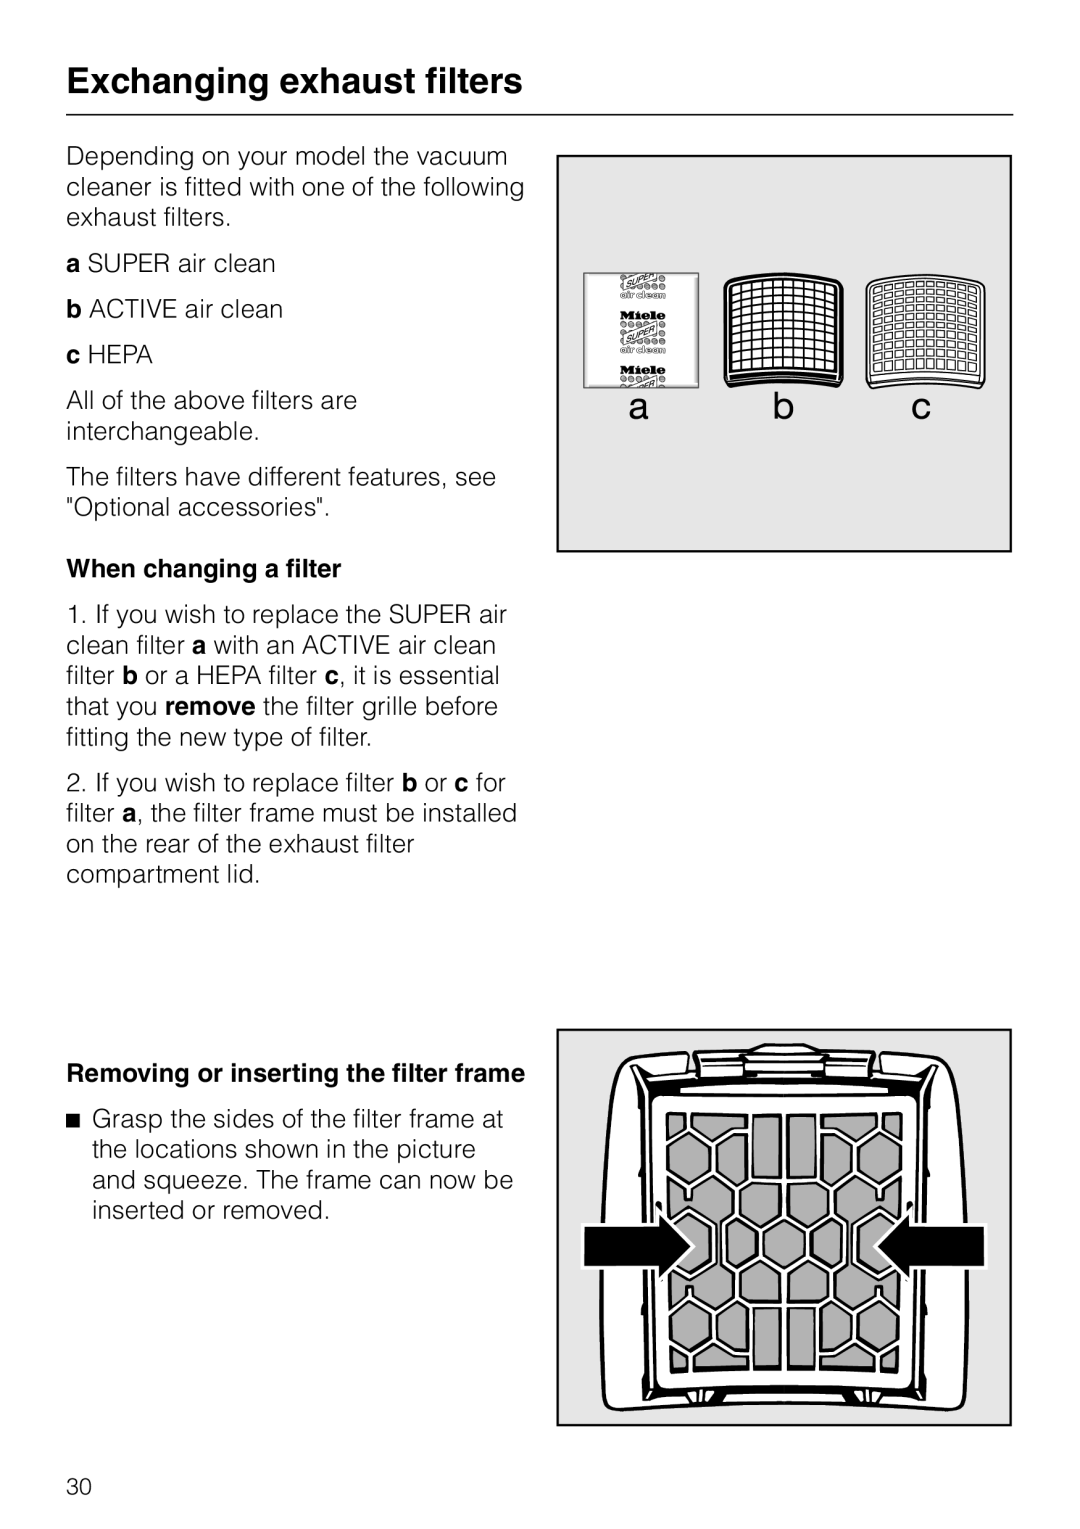 Miele S140, S160 manual Exchanging exhaust filters, When changing a filter, Removing or inserting the filter frame 